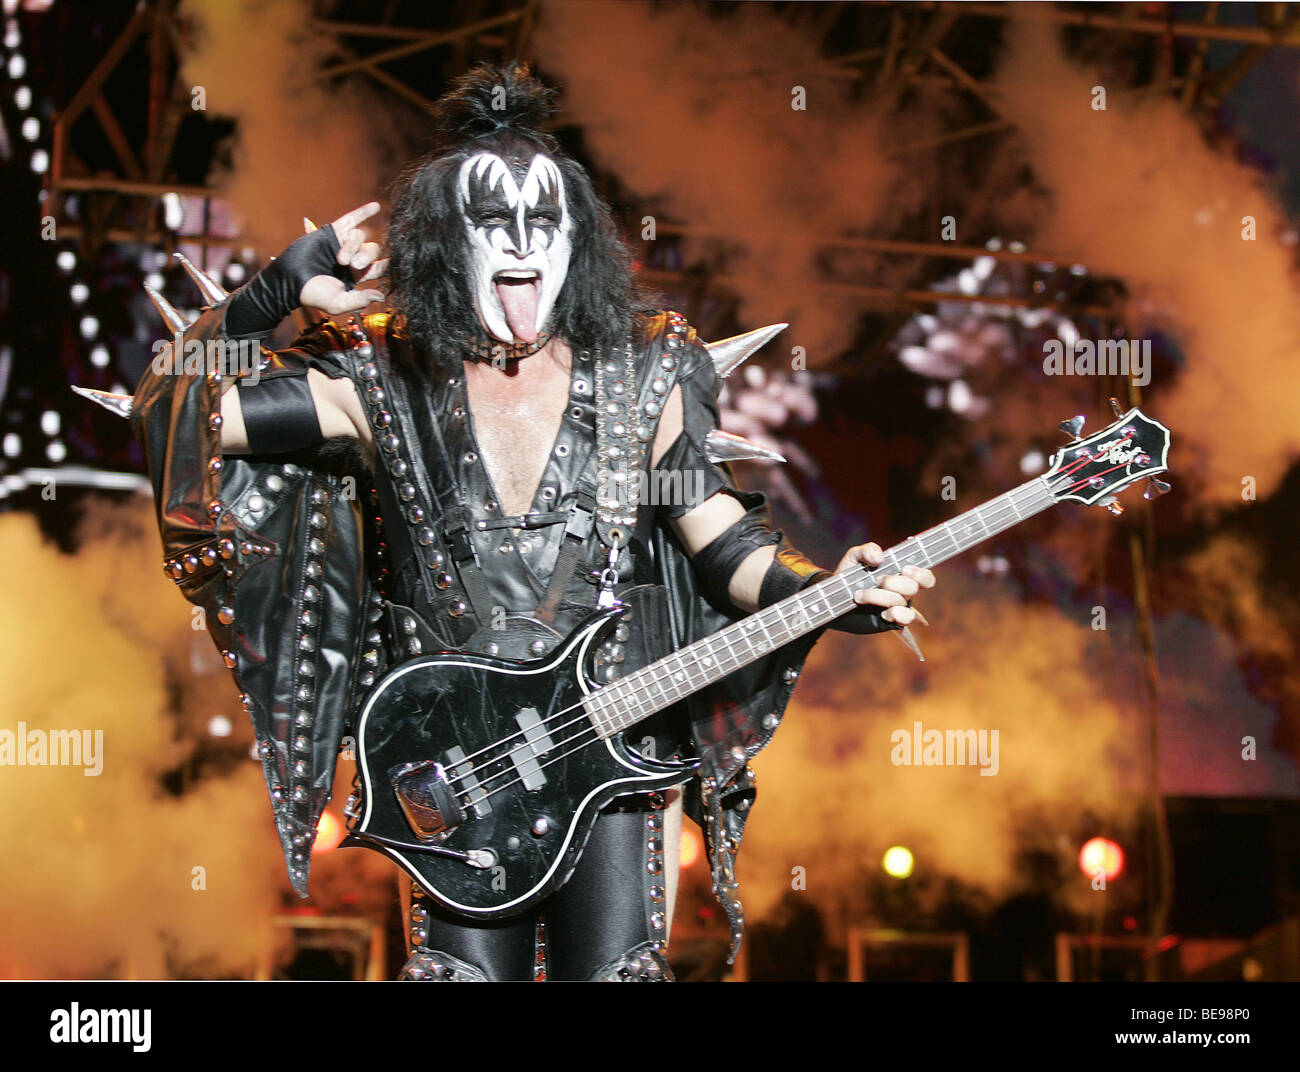 KISS - US rock group with Gene Simmons at the Rockin The Corps concert in 2005 Stock Photo